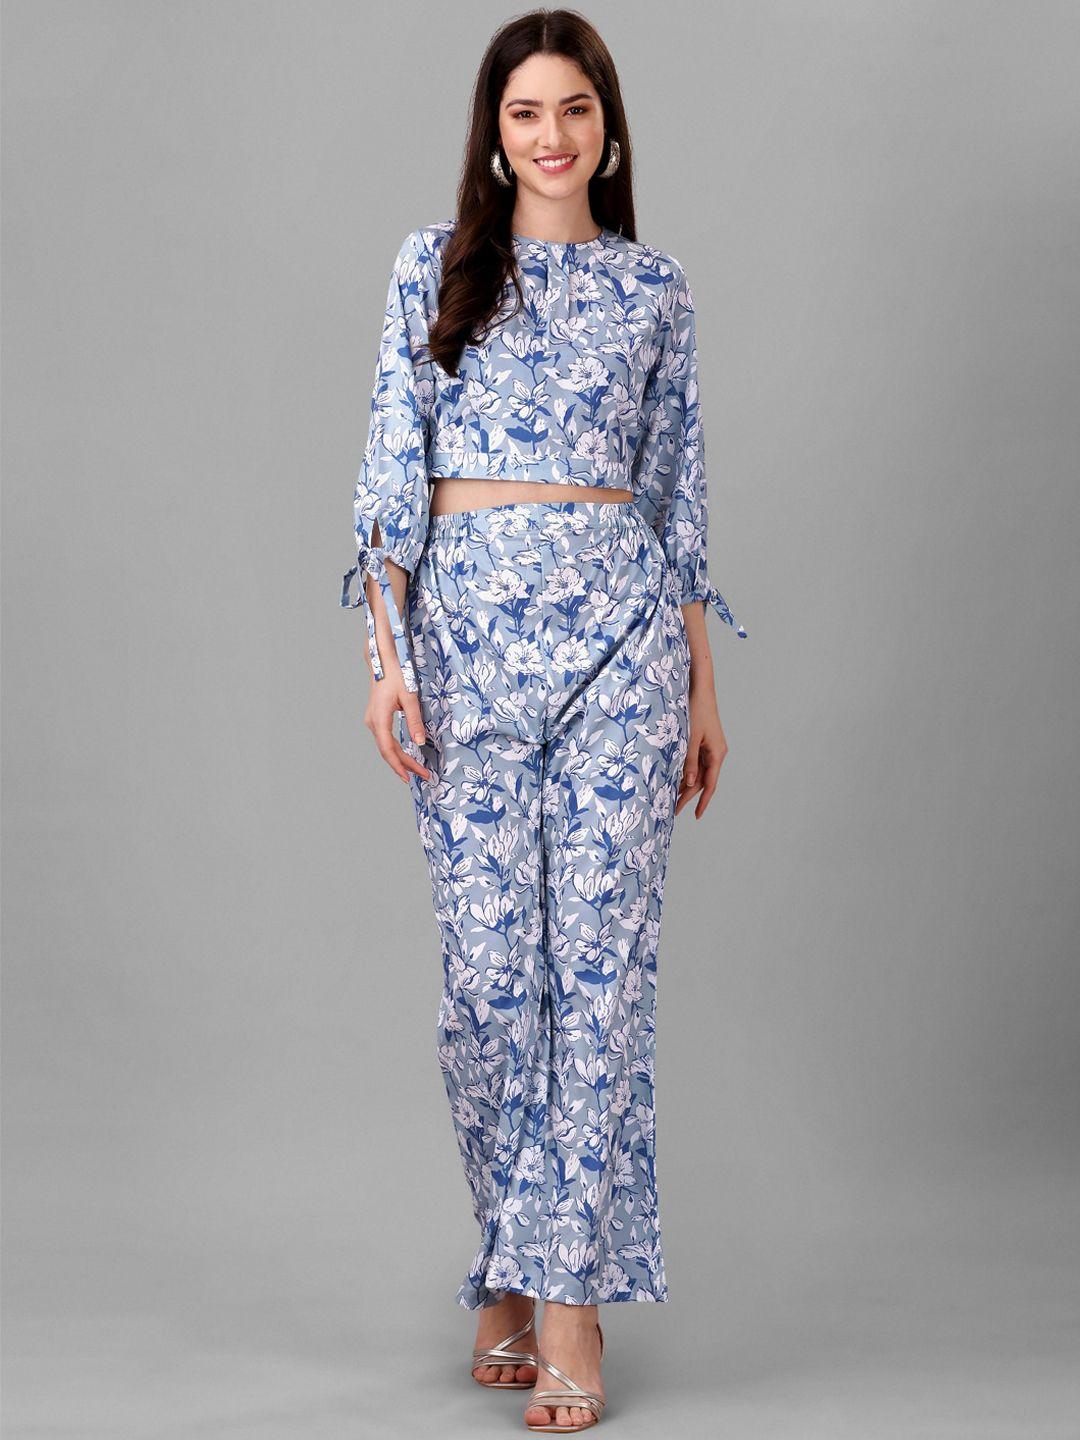 masakali.co floral printed  top with trousers co-ords